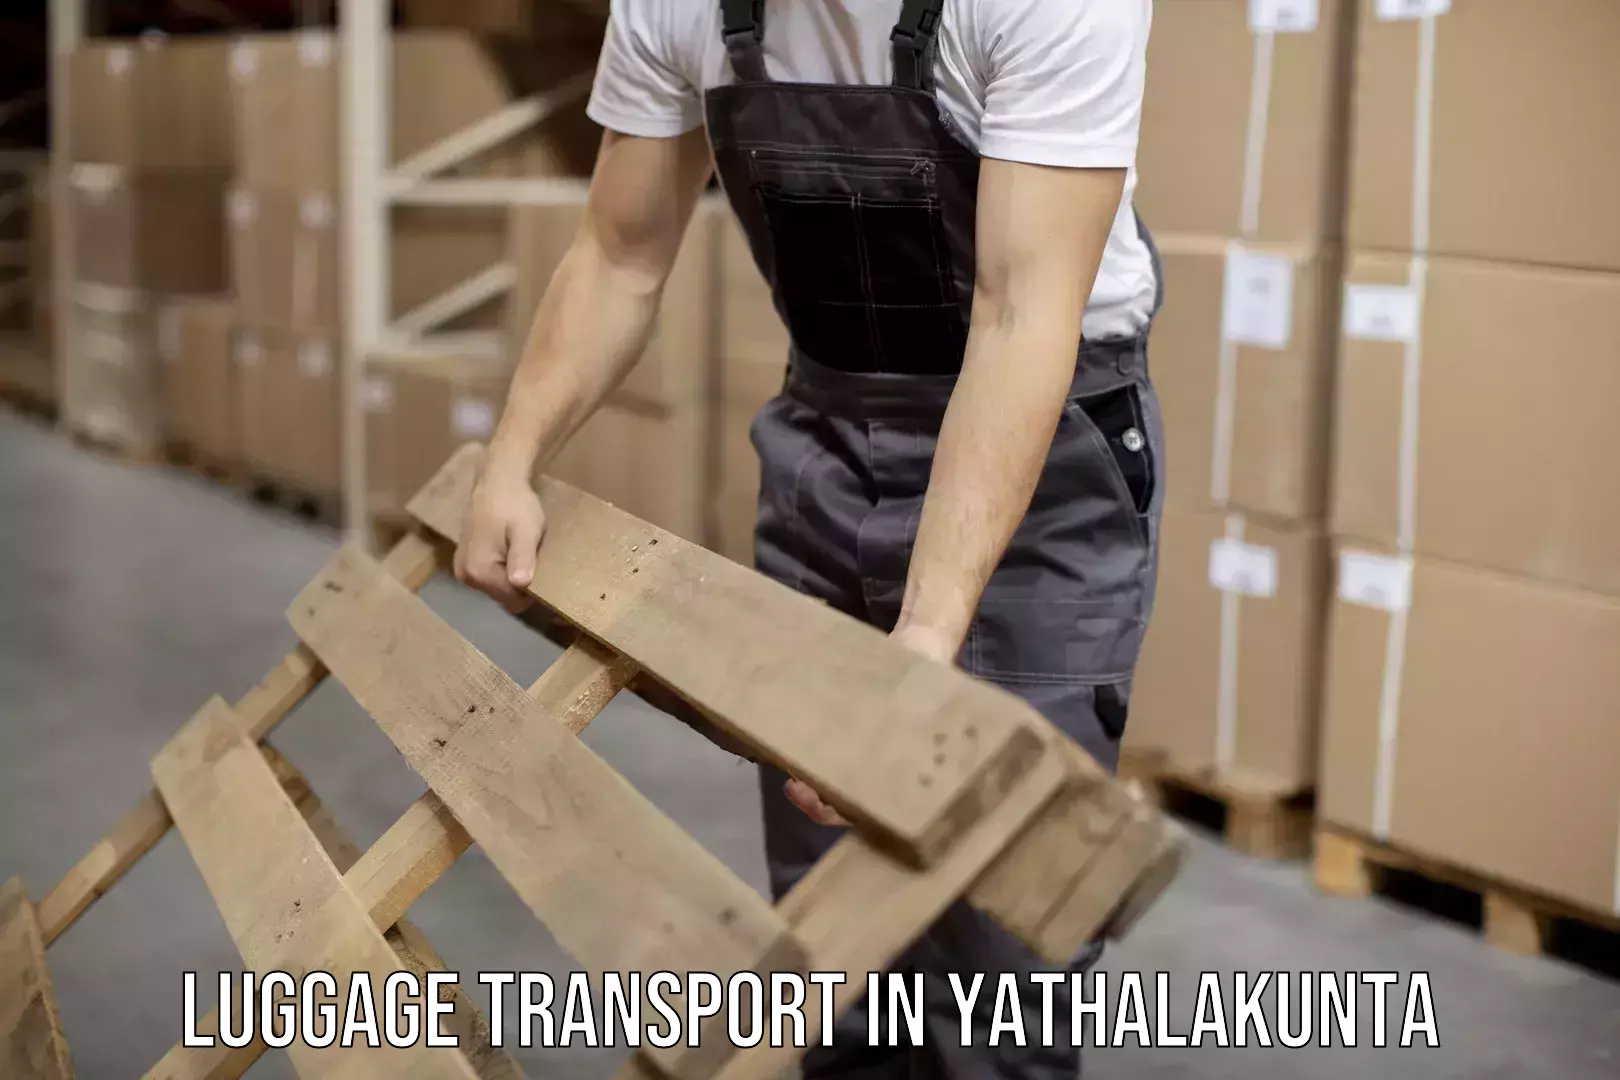 Luggage transport solutions in Yathalakunta